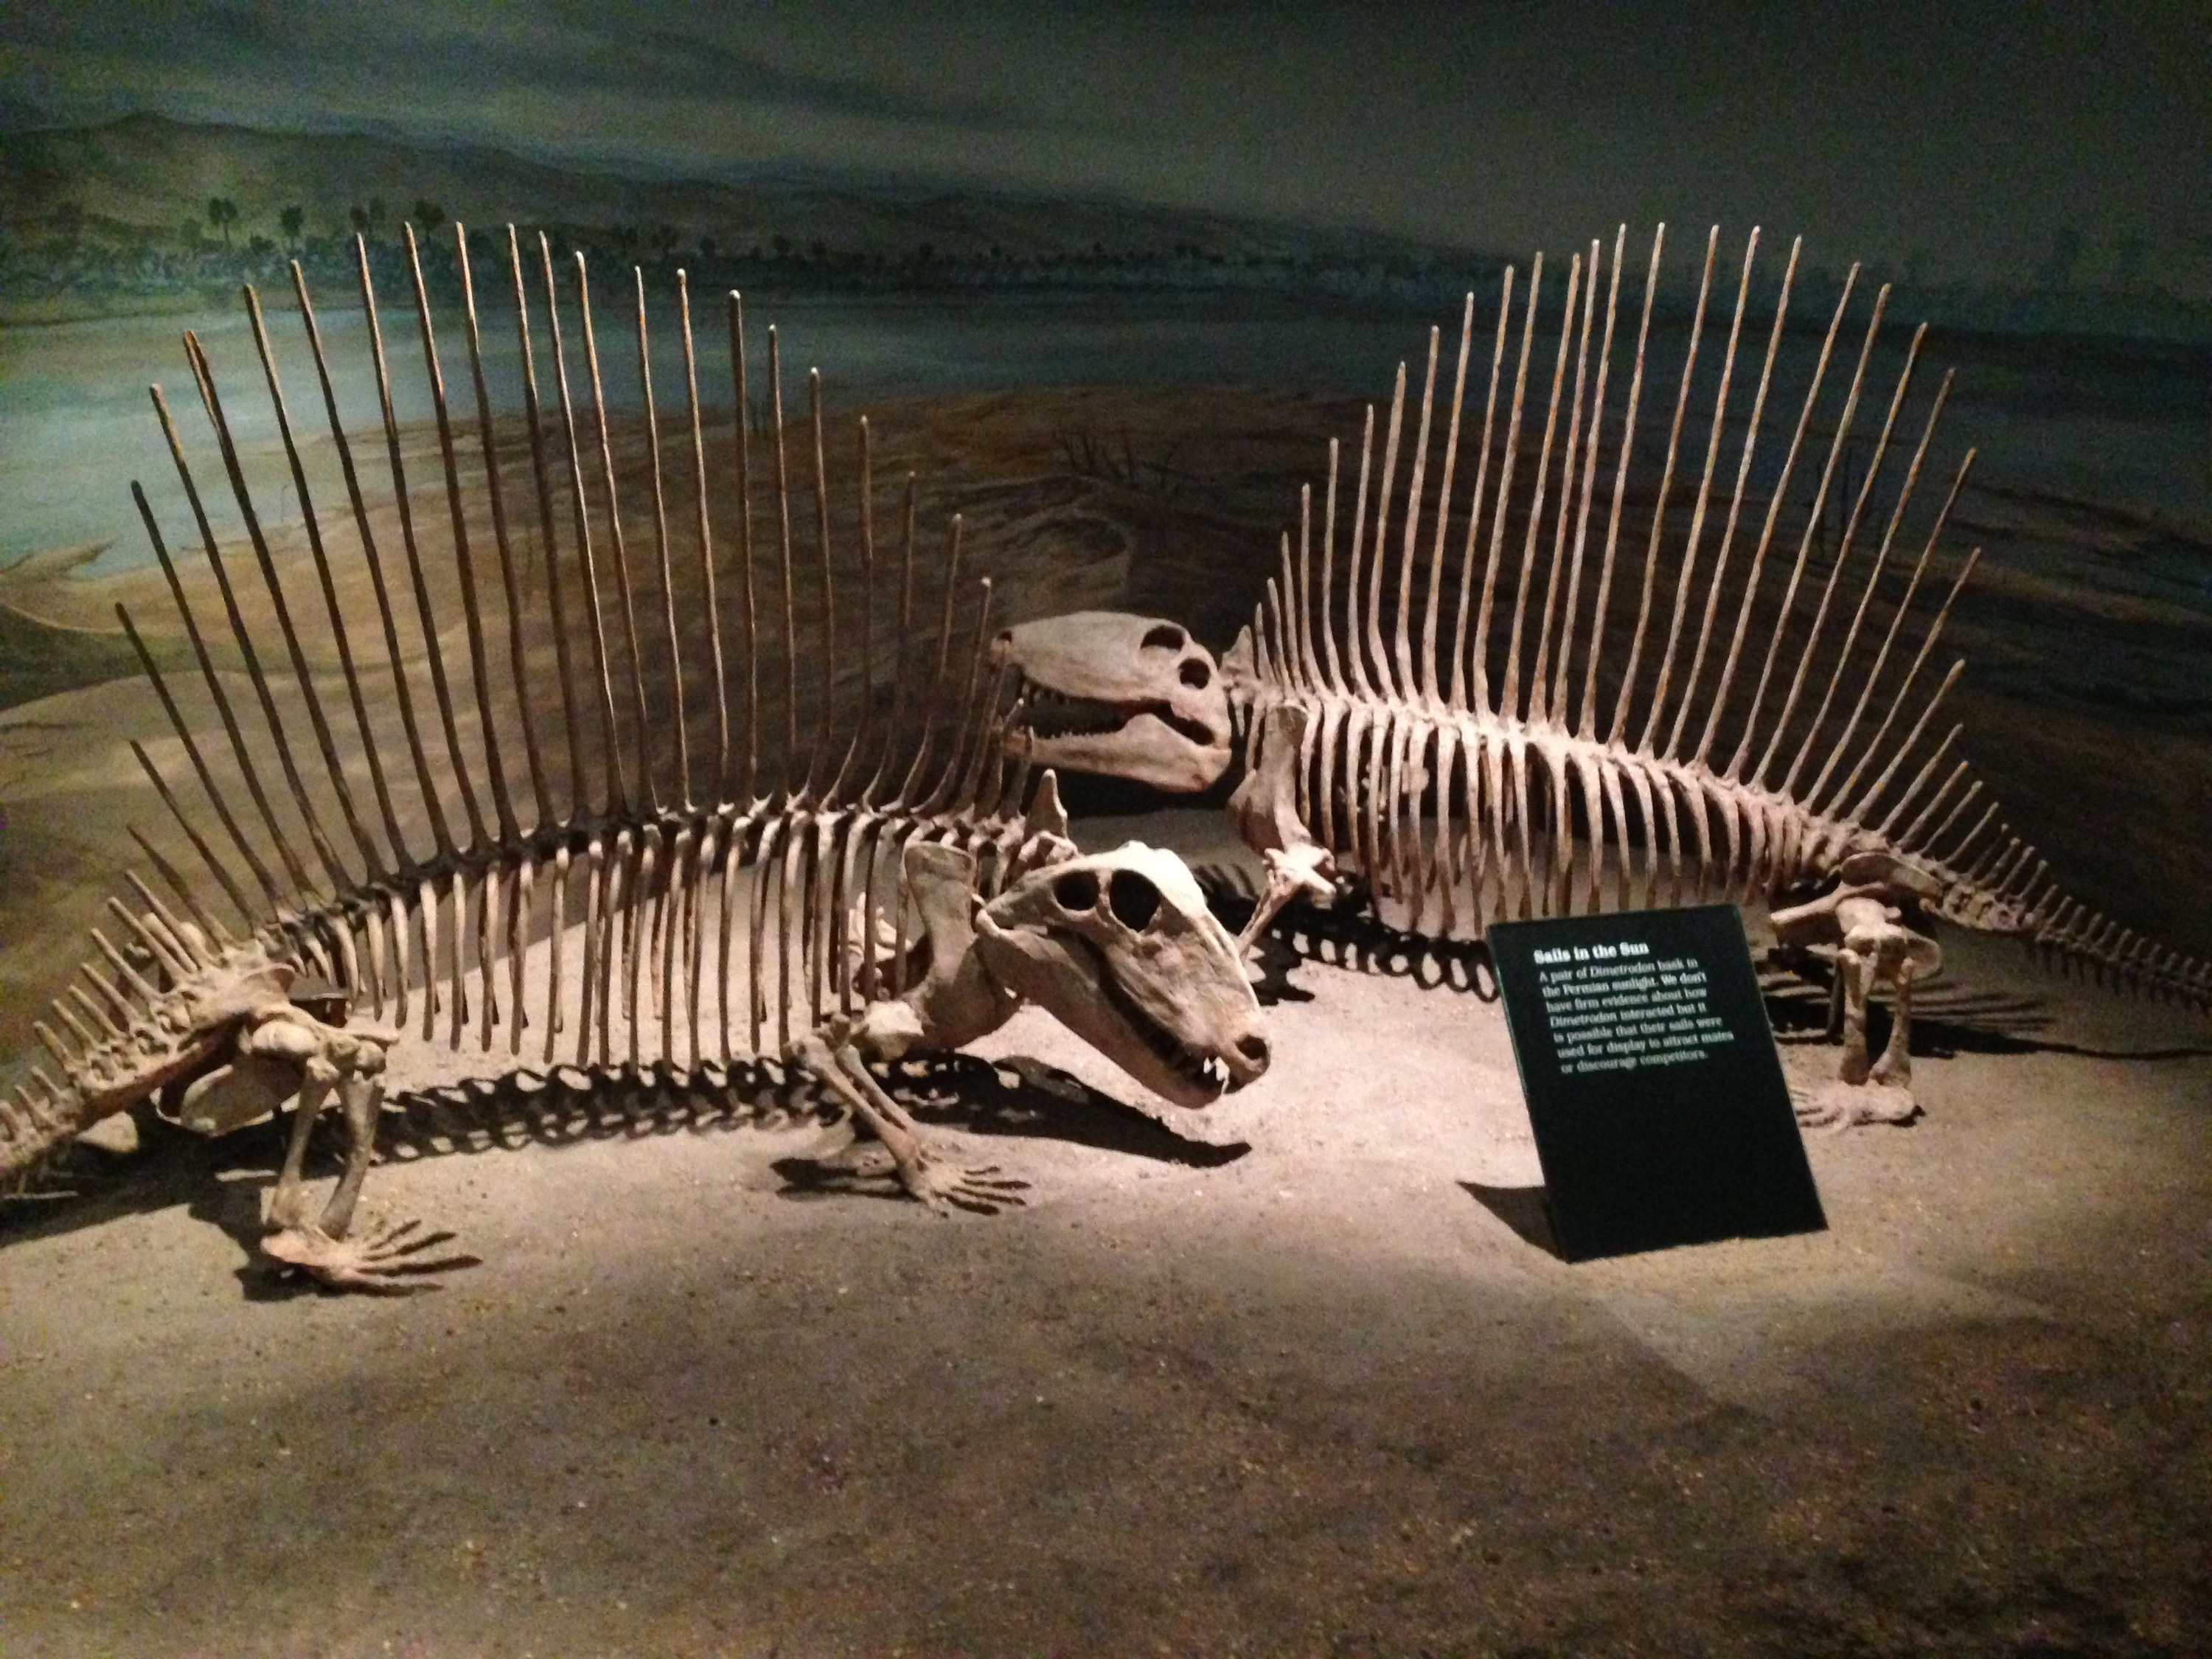 Dinosaur fossils at a museum